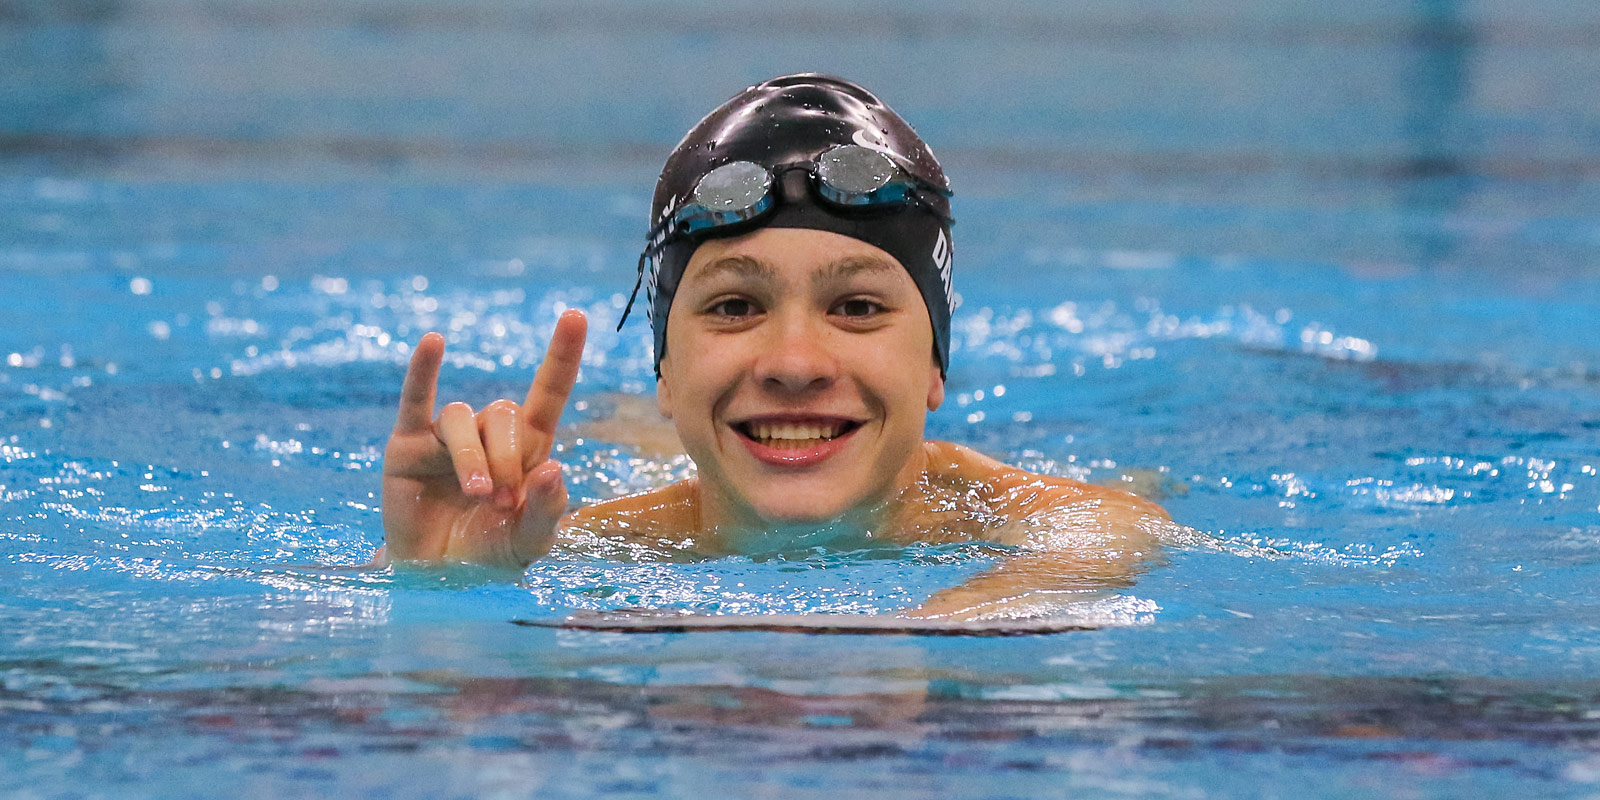 A young swimmer shows his Longhorn pride